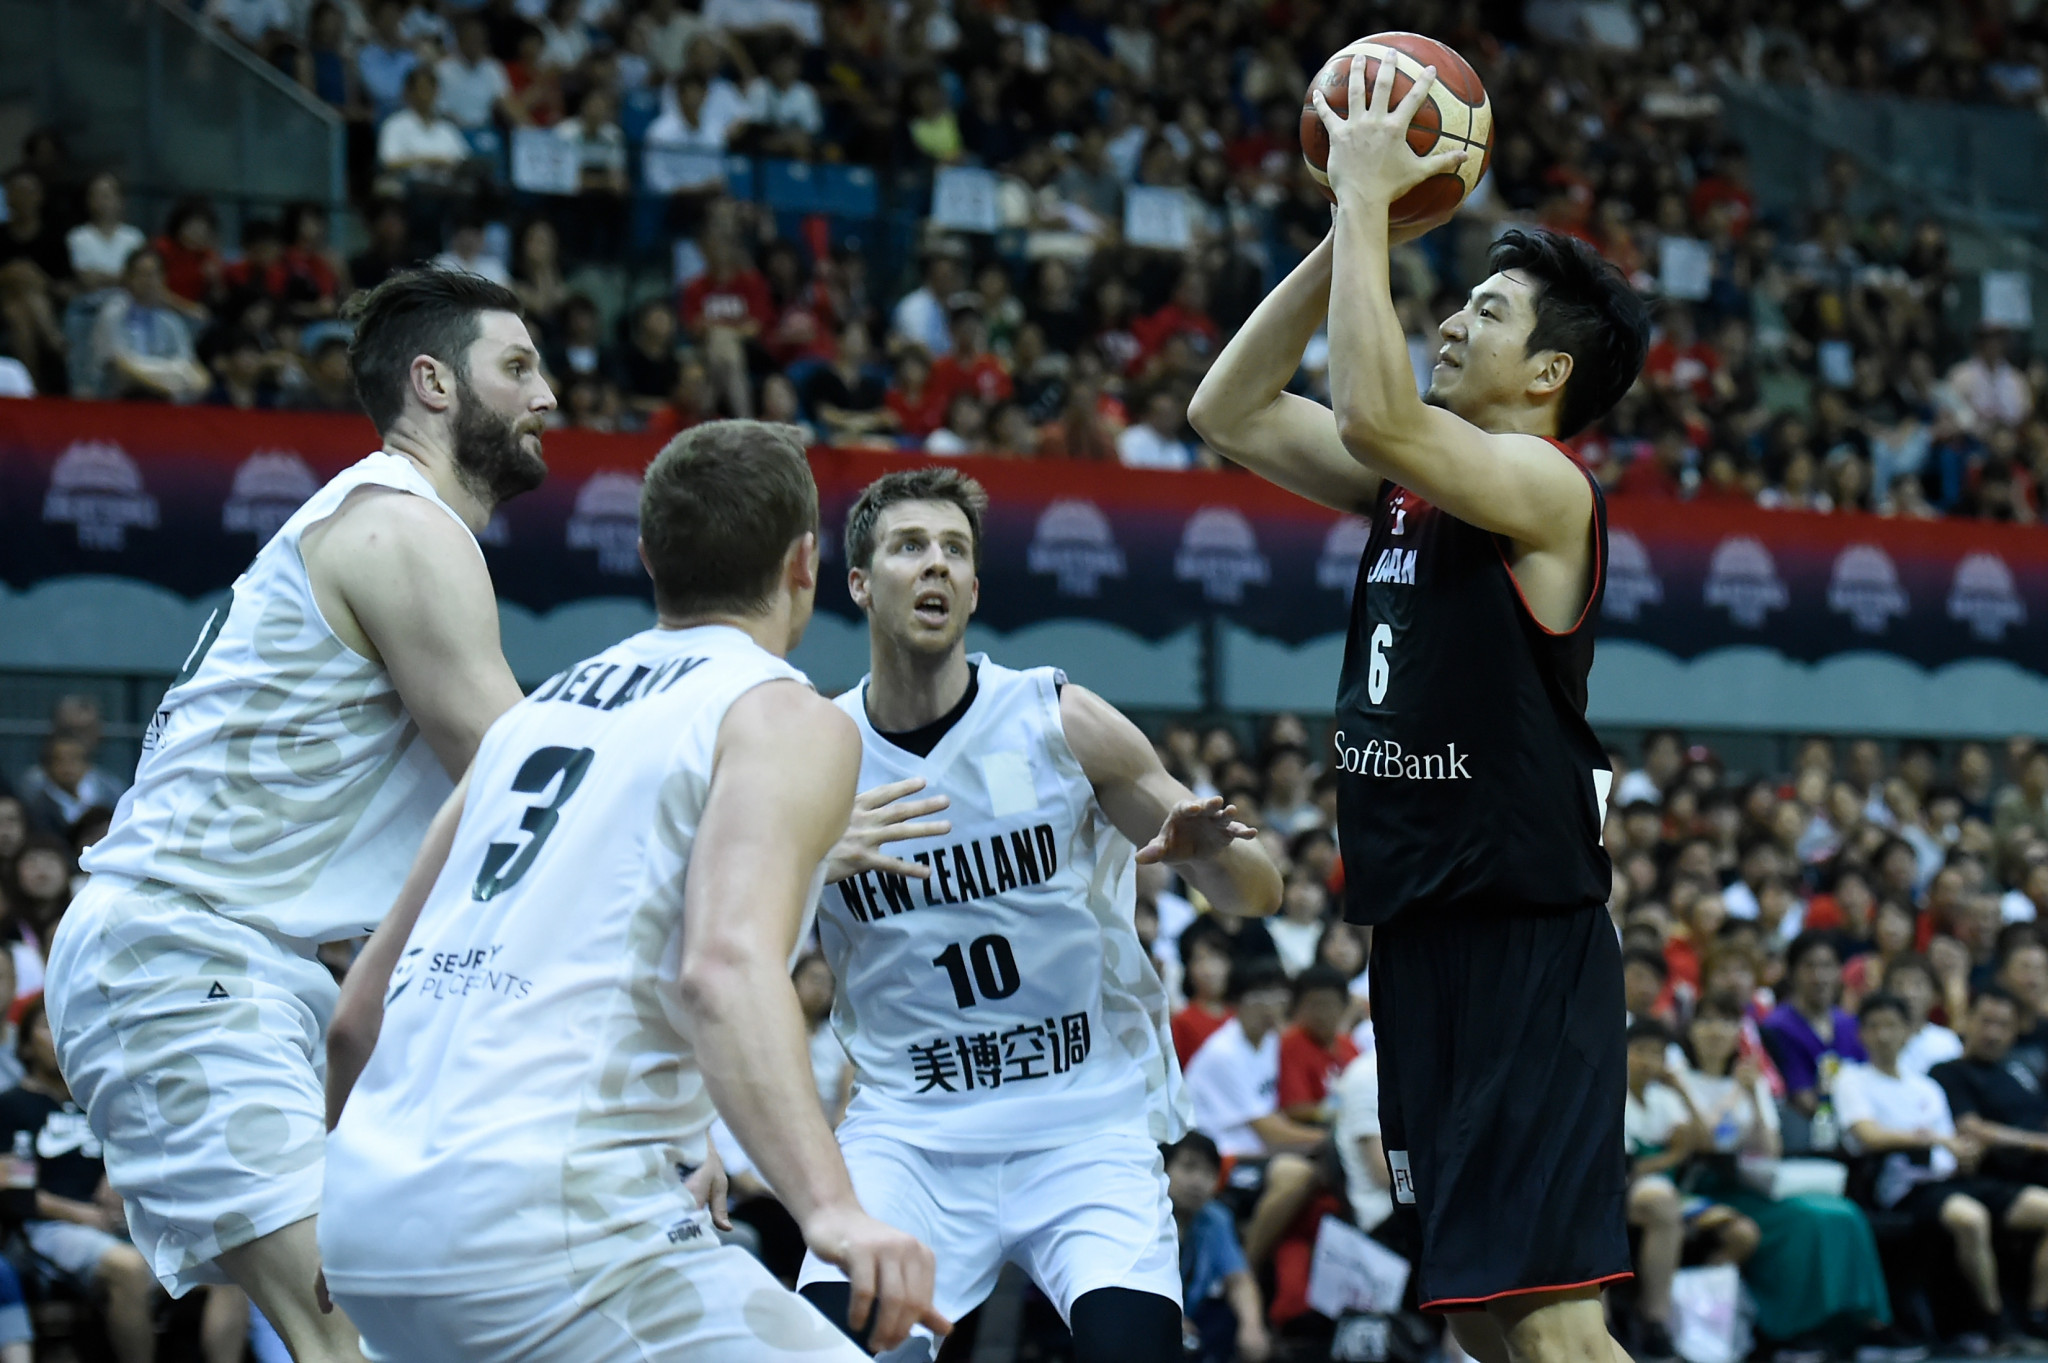 Japan beat New Zealand 99-89 in the event's first official game at Chiba Port Arena last week ©Getty Images